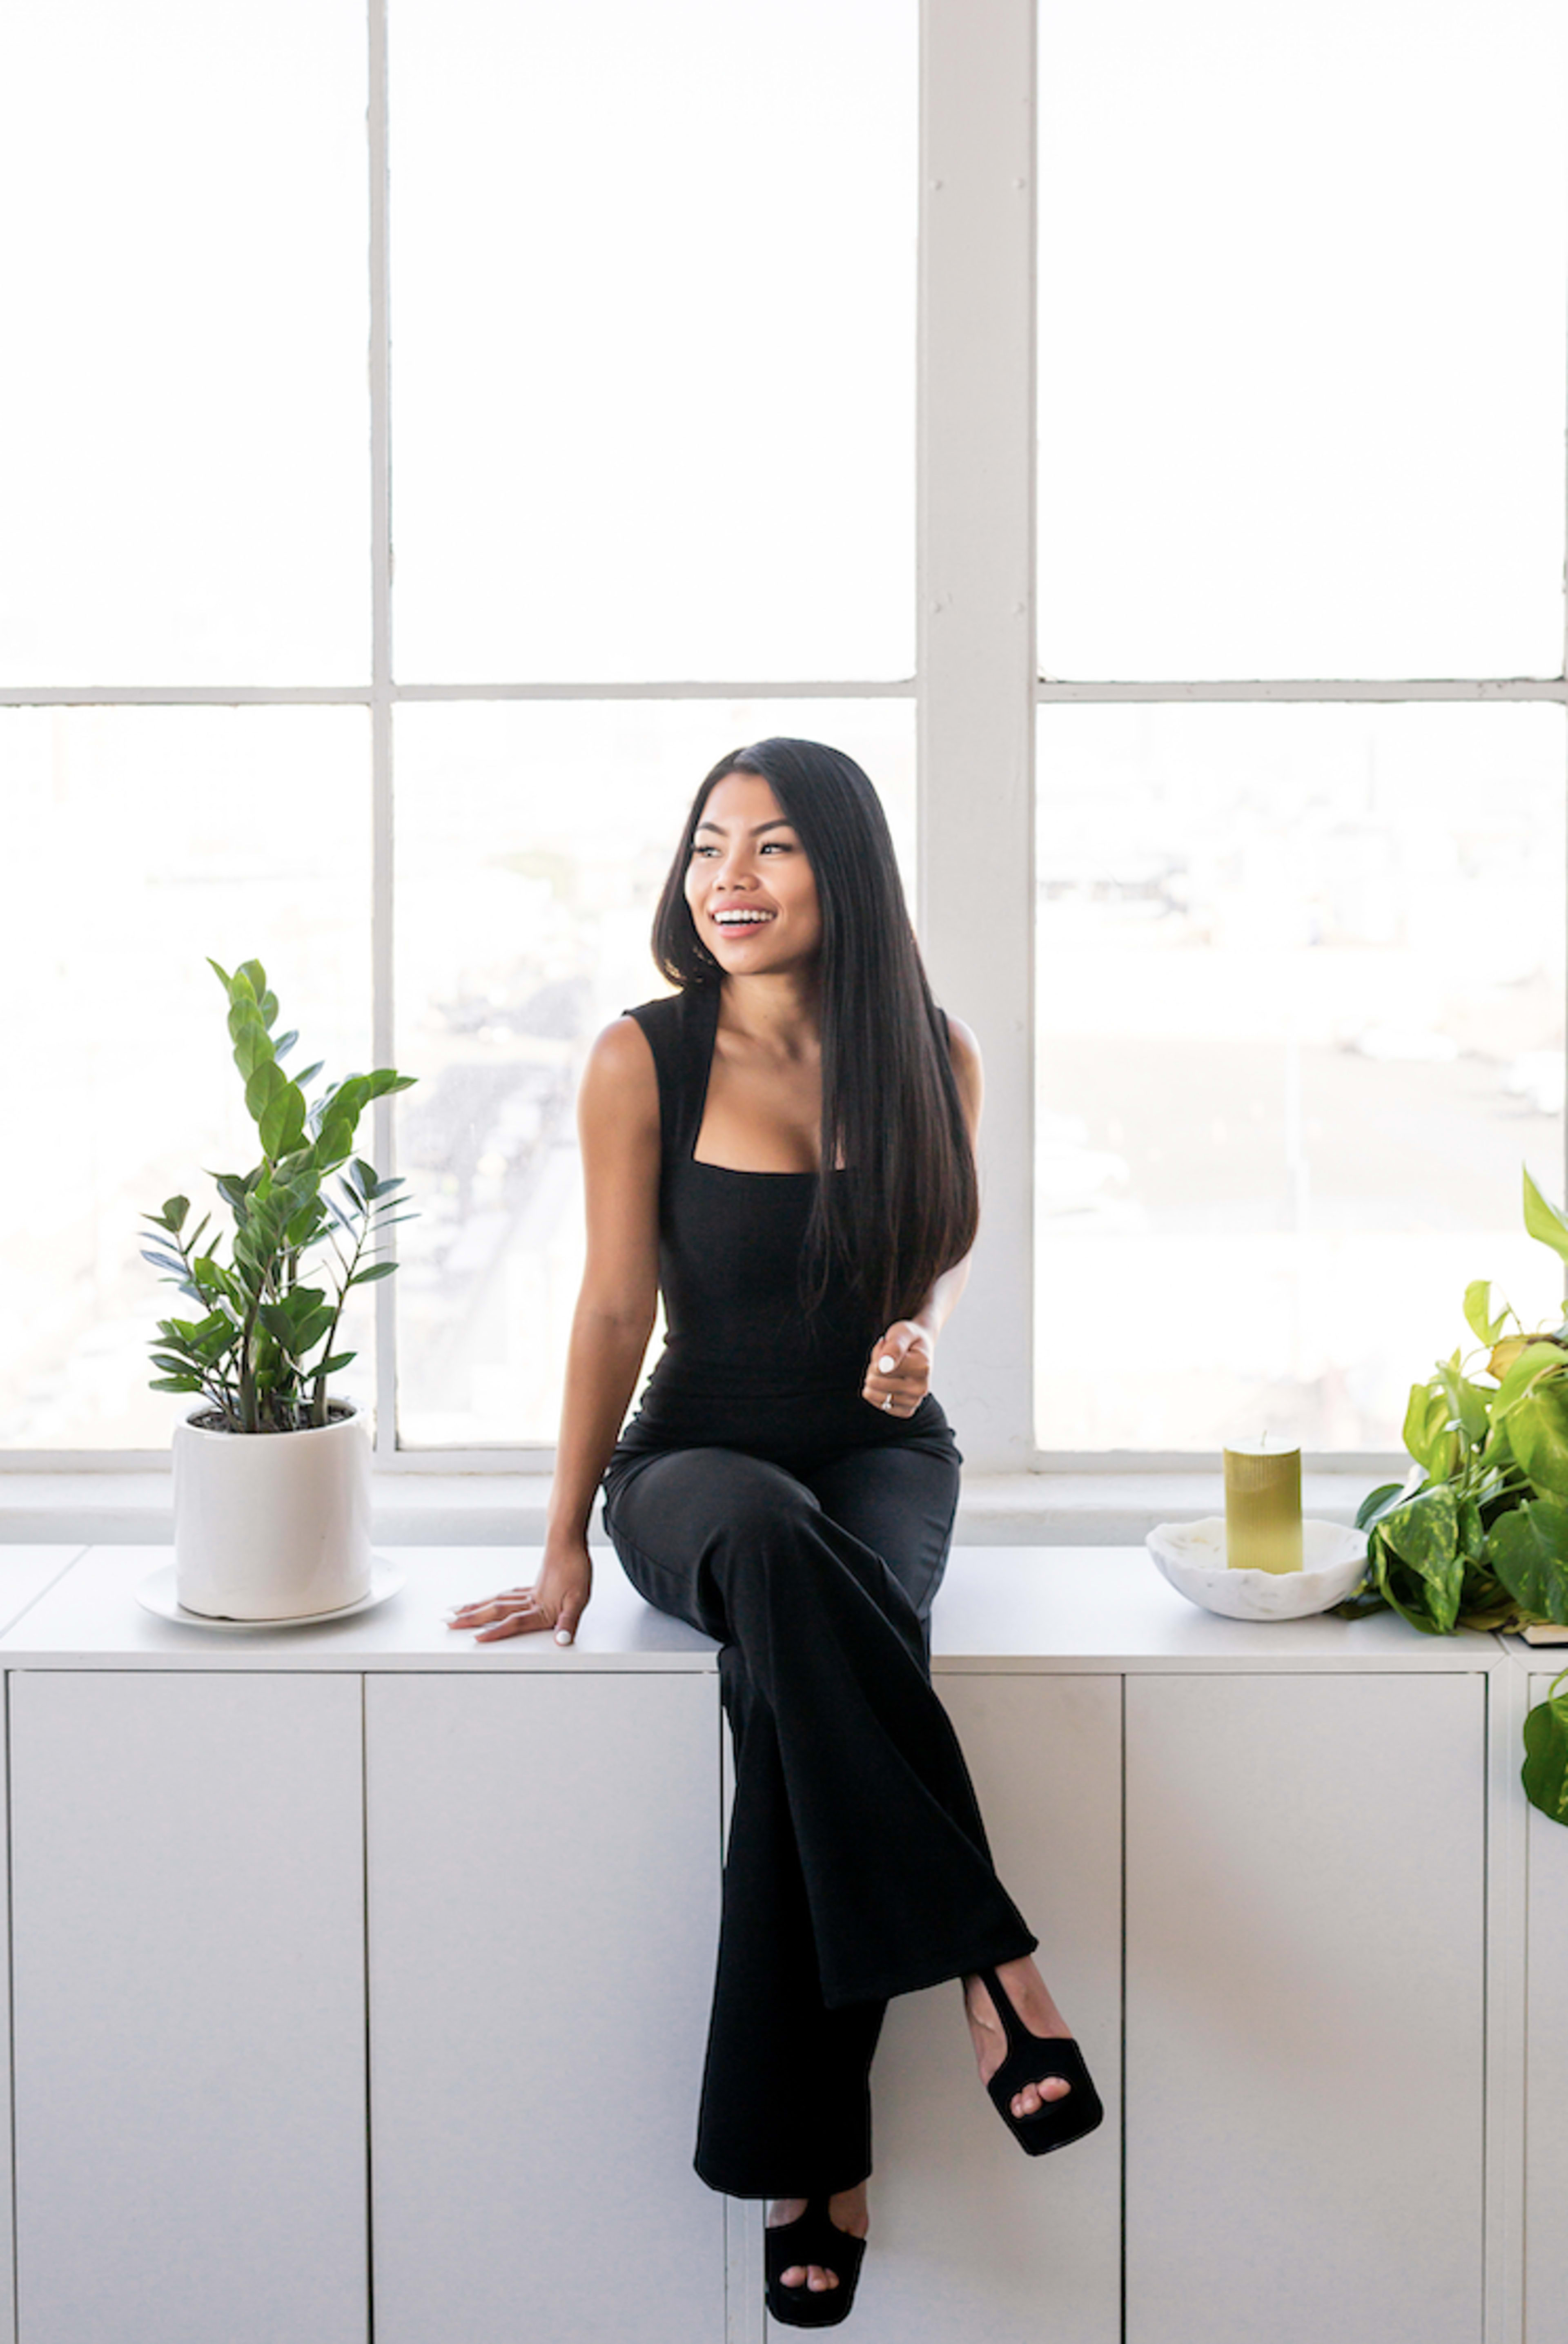 A woman posing for a photoshoot on a white counter in front of a window with plants.